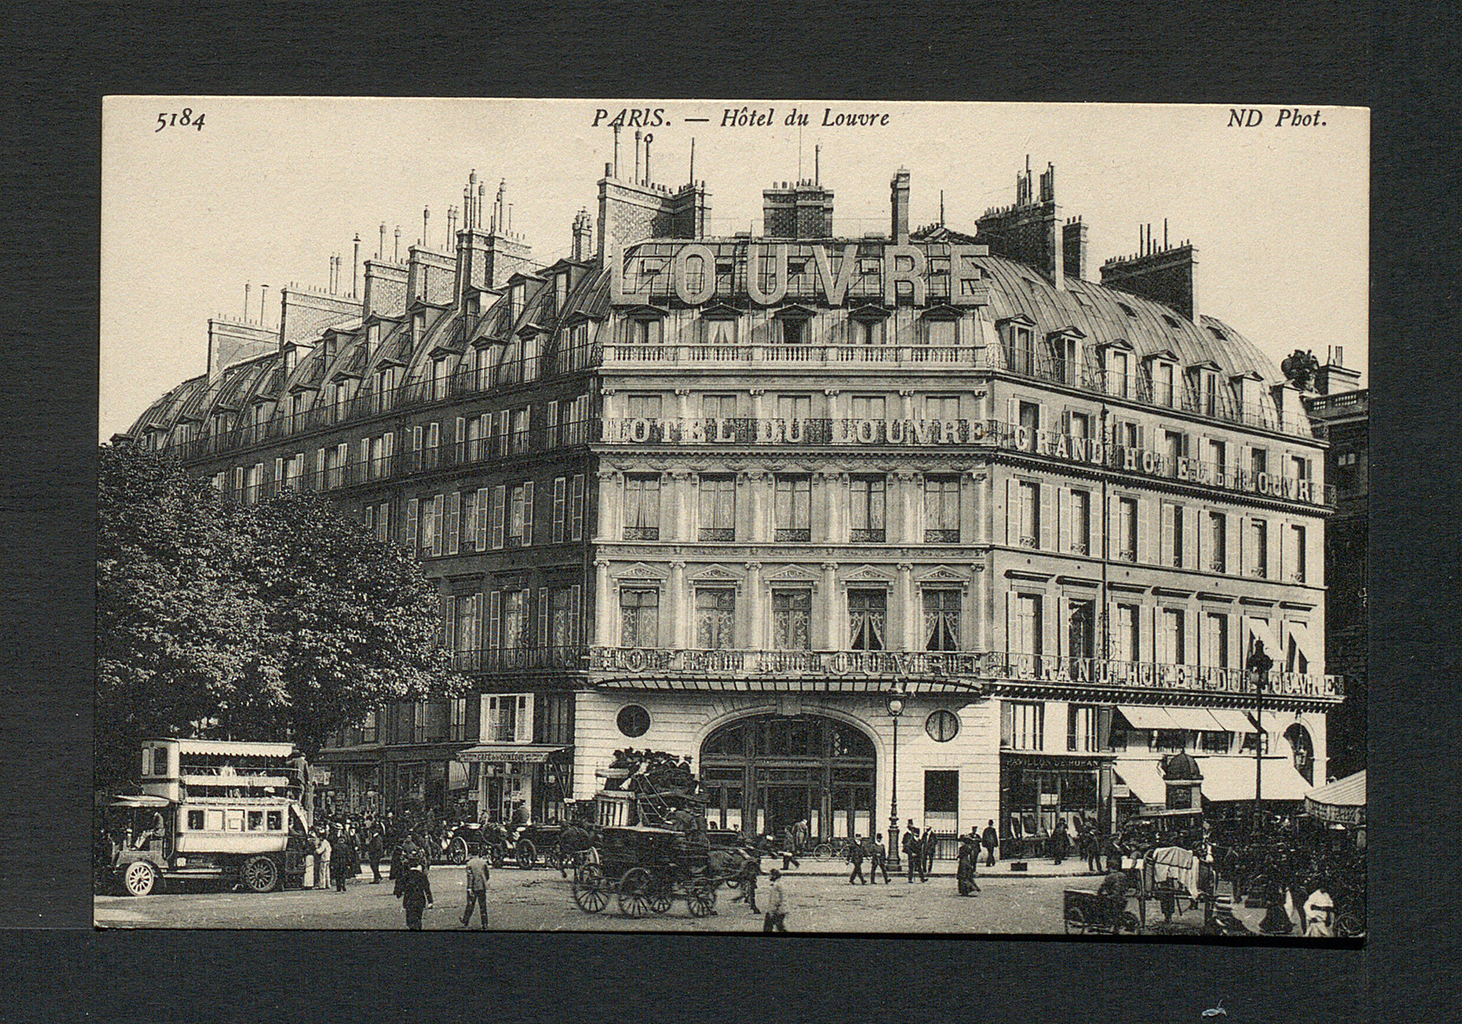 A black and white photograph of a long building with dozens of windows. There are letters on the front of the building which spell out &ldquo;LOUVRE&rdquo; The doors to the building are arched and surrounded by people and carriages. At the top of the photograph the words &ldquo;5184&rdquo;, &ldquo;PARIS. - Hotel du Louvre&rdquo;, and &ldquo;ND Phot.&rdquo; are written.